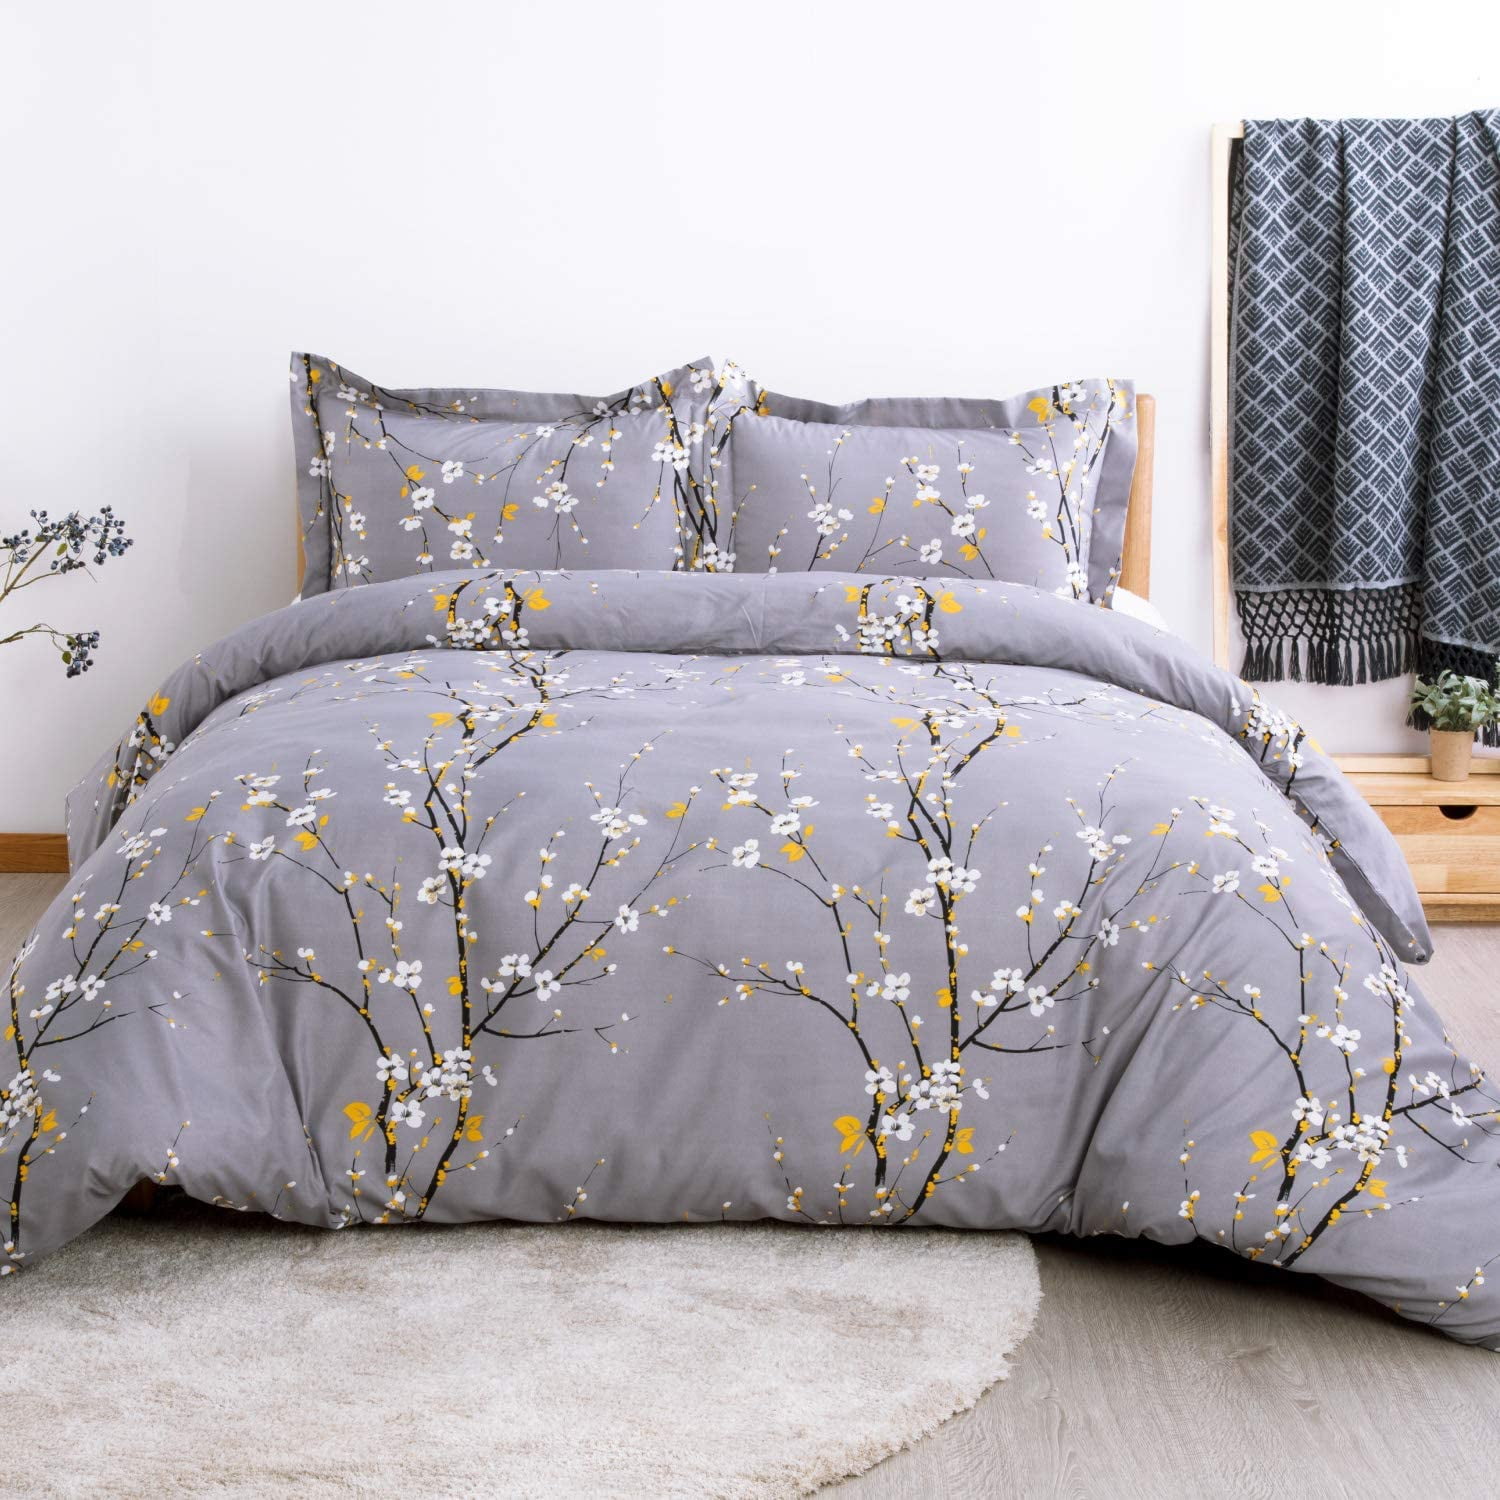 with Zipper Closure Birds and Flowers Pattern Printed 100% Cotton Bedding Duvet Cover 90 x 68 ELE Home Textile 3 Pieces Duvet Cover Set Birds and Flowers, Twin Size